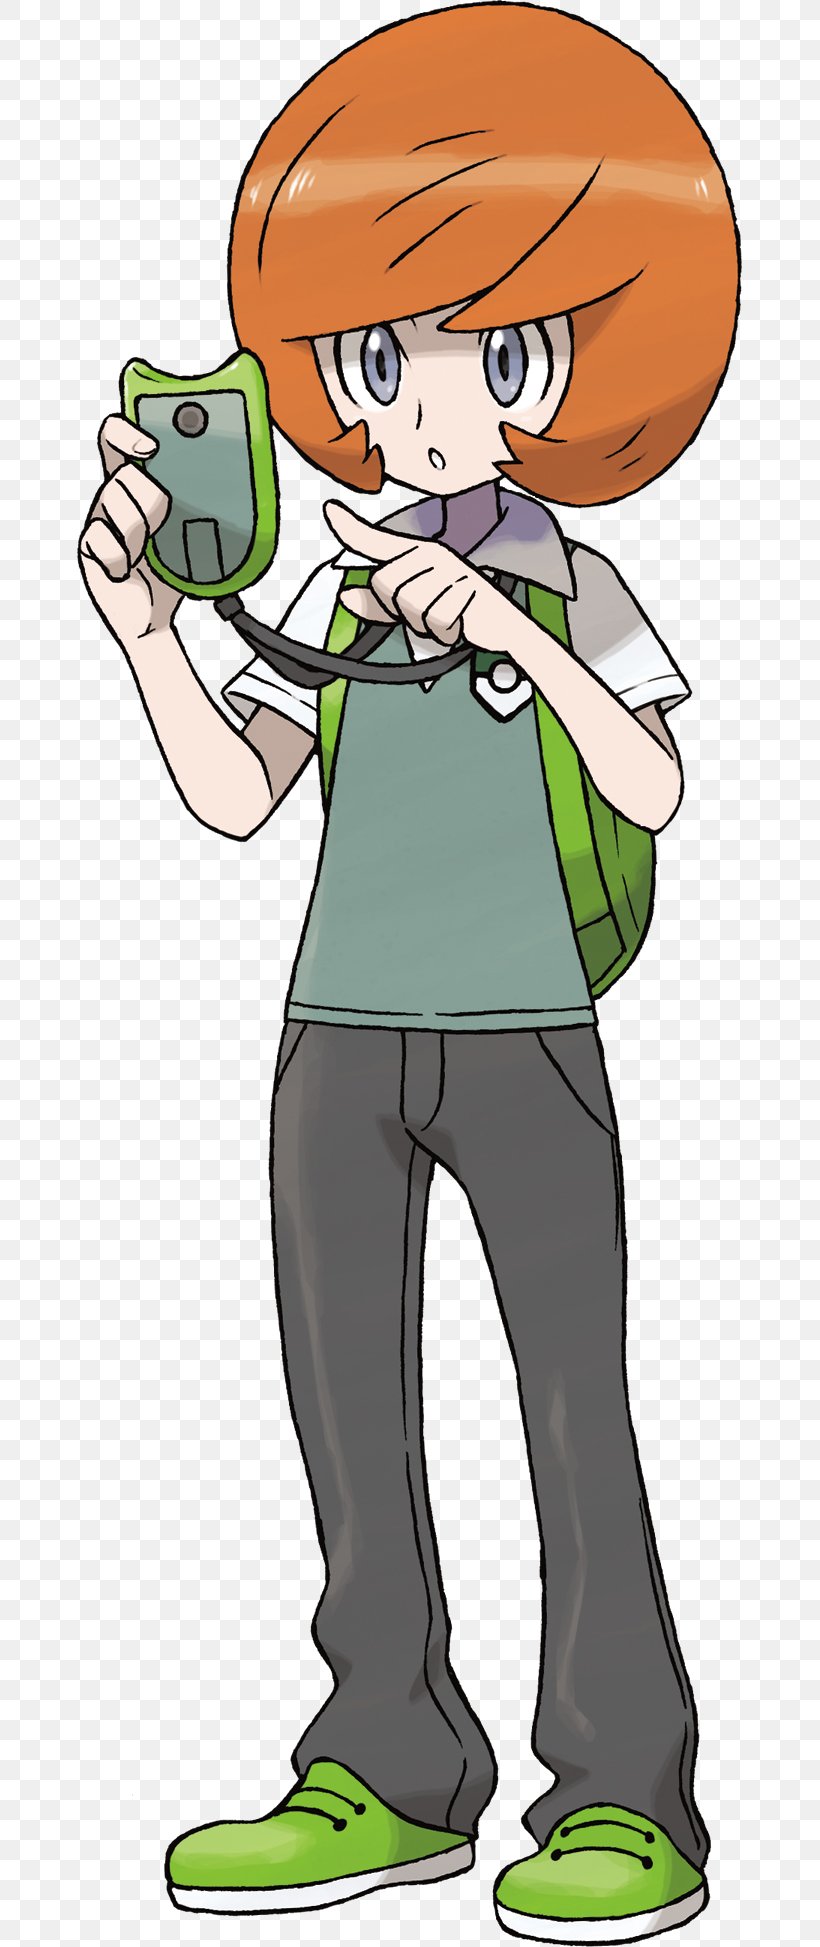 Pokémon X And Y Pokémon GO Video Game Character, PNG, 665x1947px, Pokemon Go, Boy, Cartoon, Character, Clothing Download Free